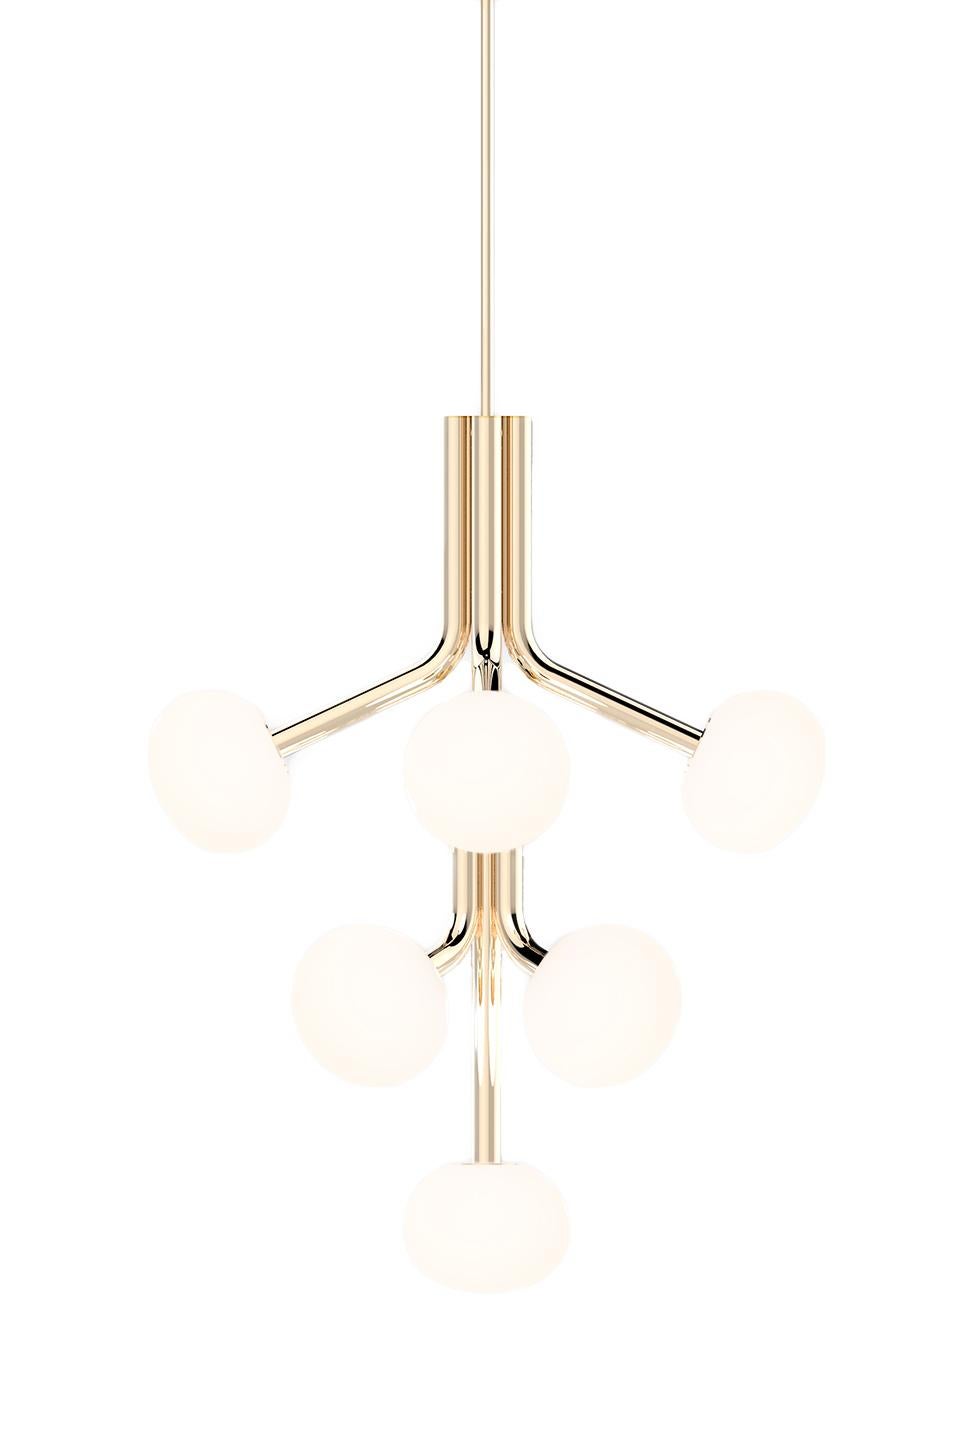 The graceful Etoile collection is composed of curved limbs providing a soft glow from the sand blasted, hand blown glass shades. The drop and stems are finished in either polished brass or nickel, or matte black.